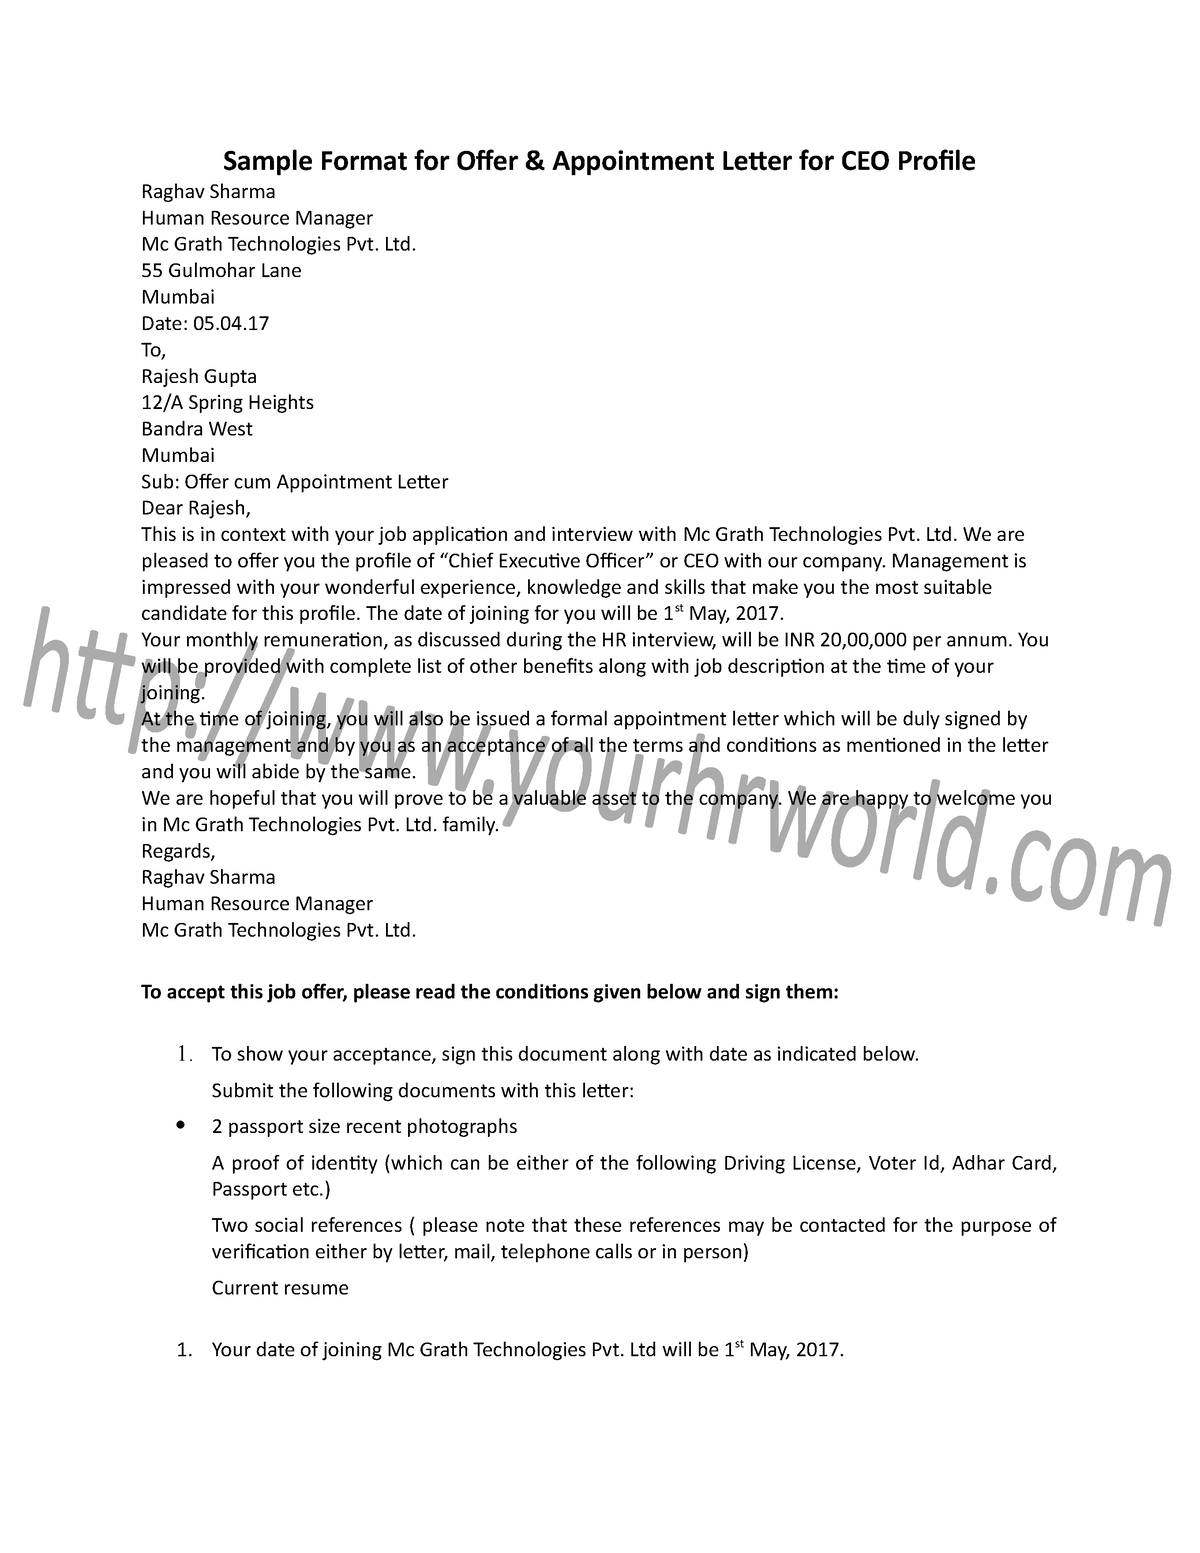 Offer Appointment Letter Format for CEO Sample Format for Offer